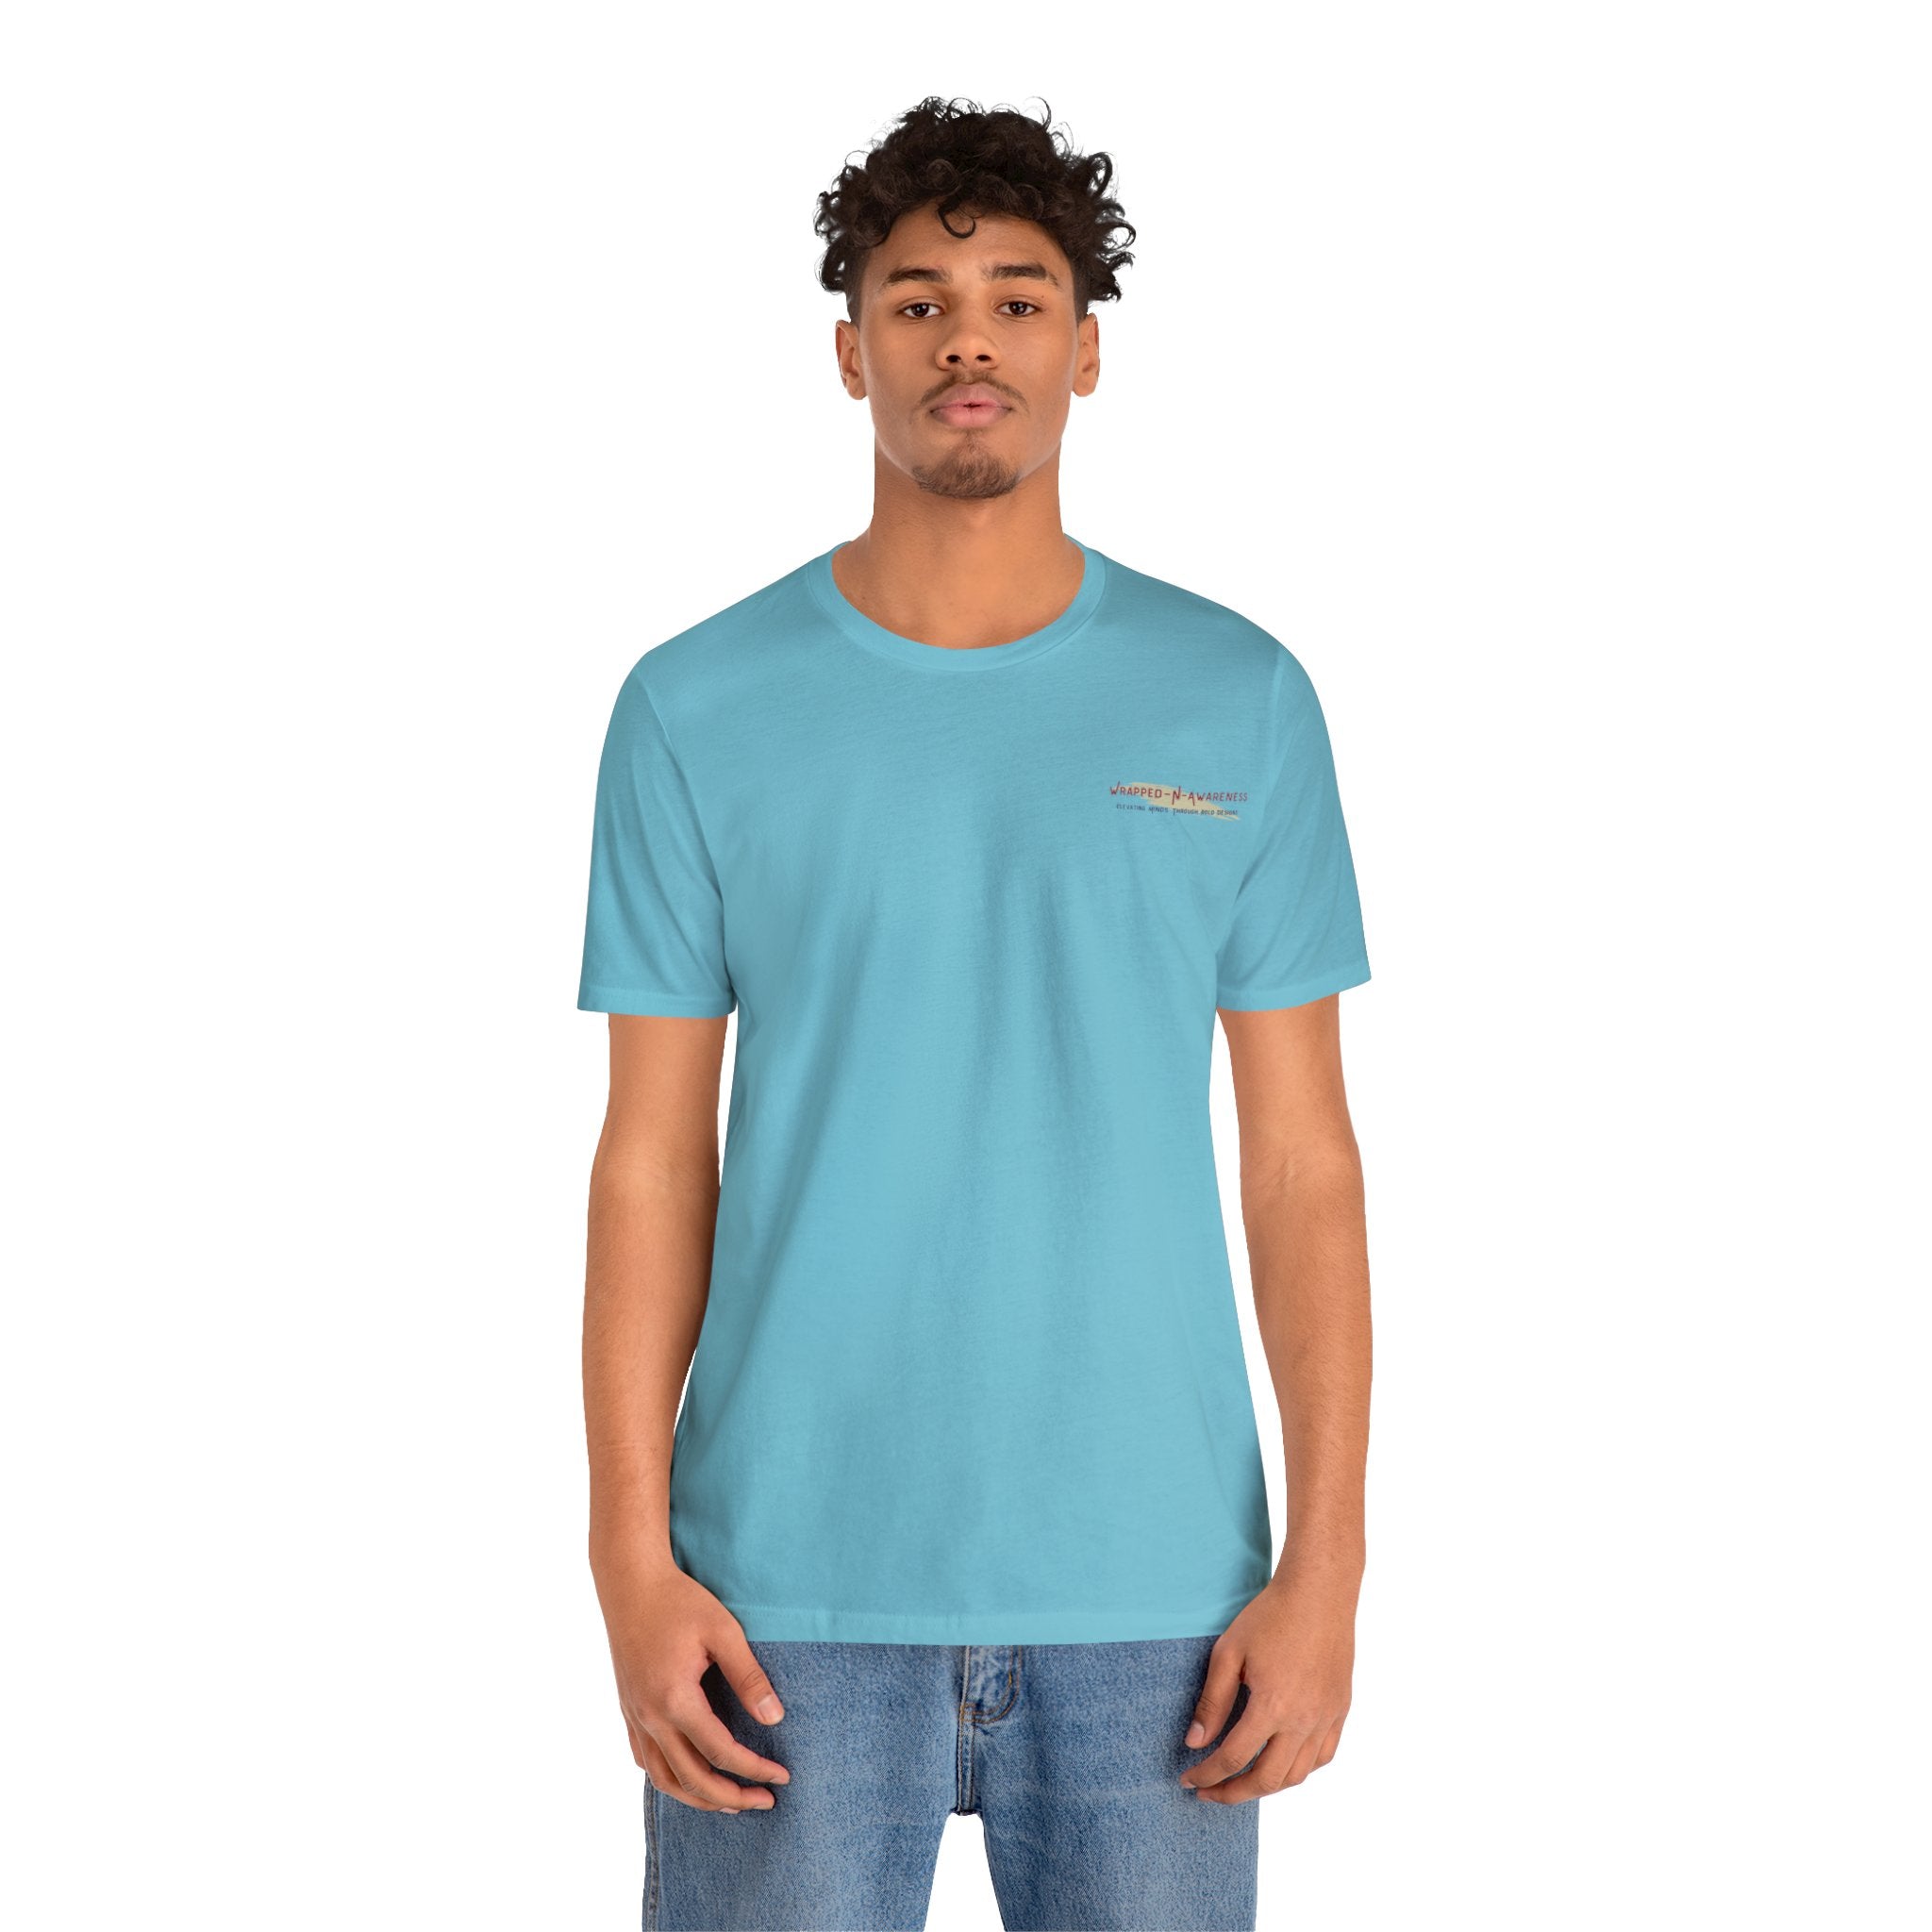 Mindfulness Heals Wounds Tee - Bella+Canvas 3001 Turquoise Airlume Cotton Bella+Canvas 3001 Crew Neckline Jersey Short Sleeve Lightweight Fabric Mental Health Support Retail Fit Tear-away Label Tee Unisex Tee T-Shirt 447978345177841161_2048 Printify